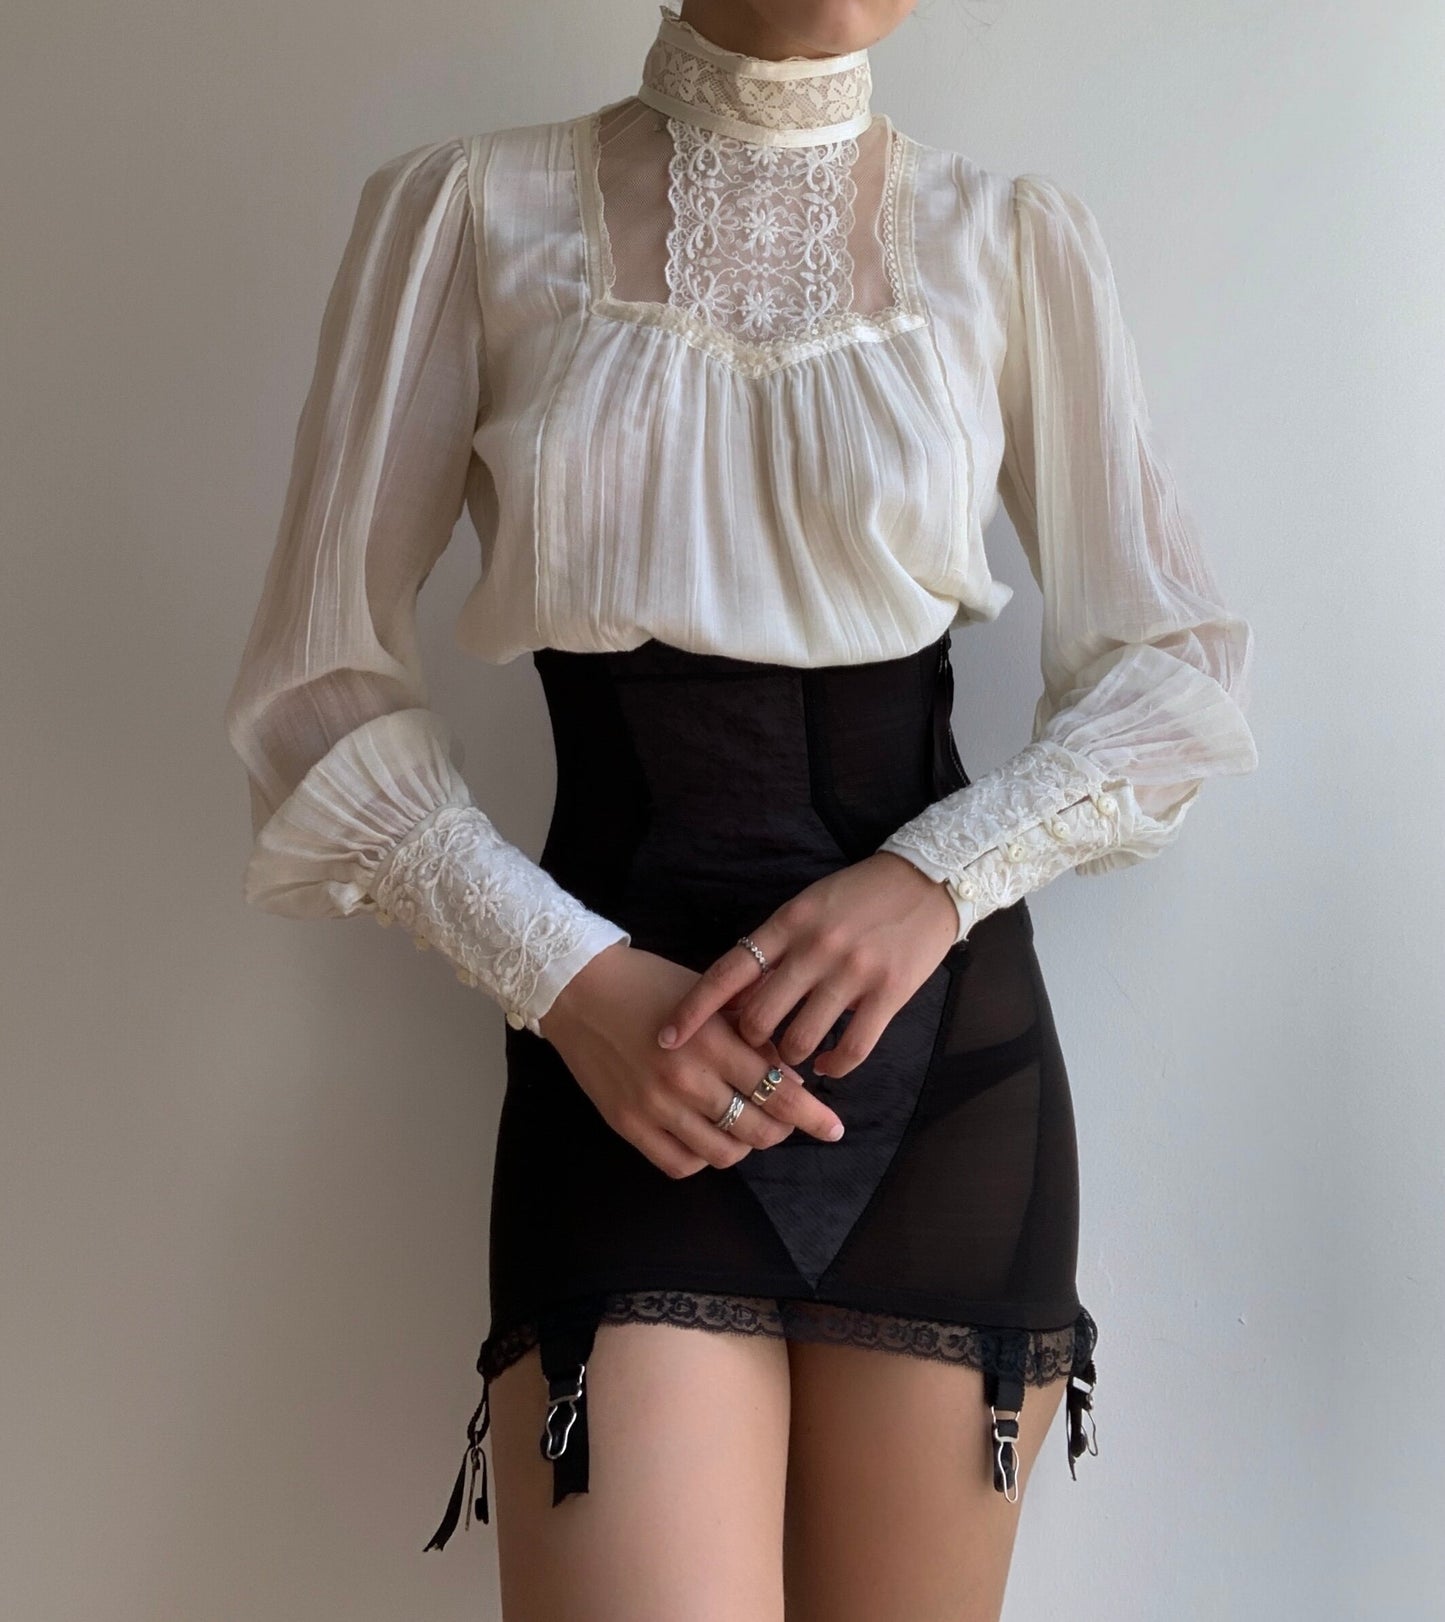 1970s Pleated Blouse (XS/S)